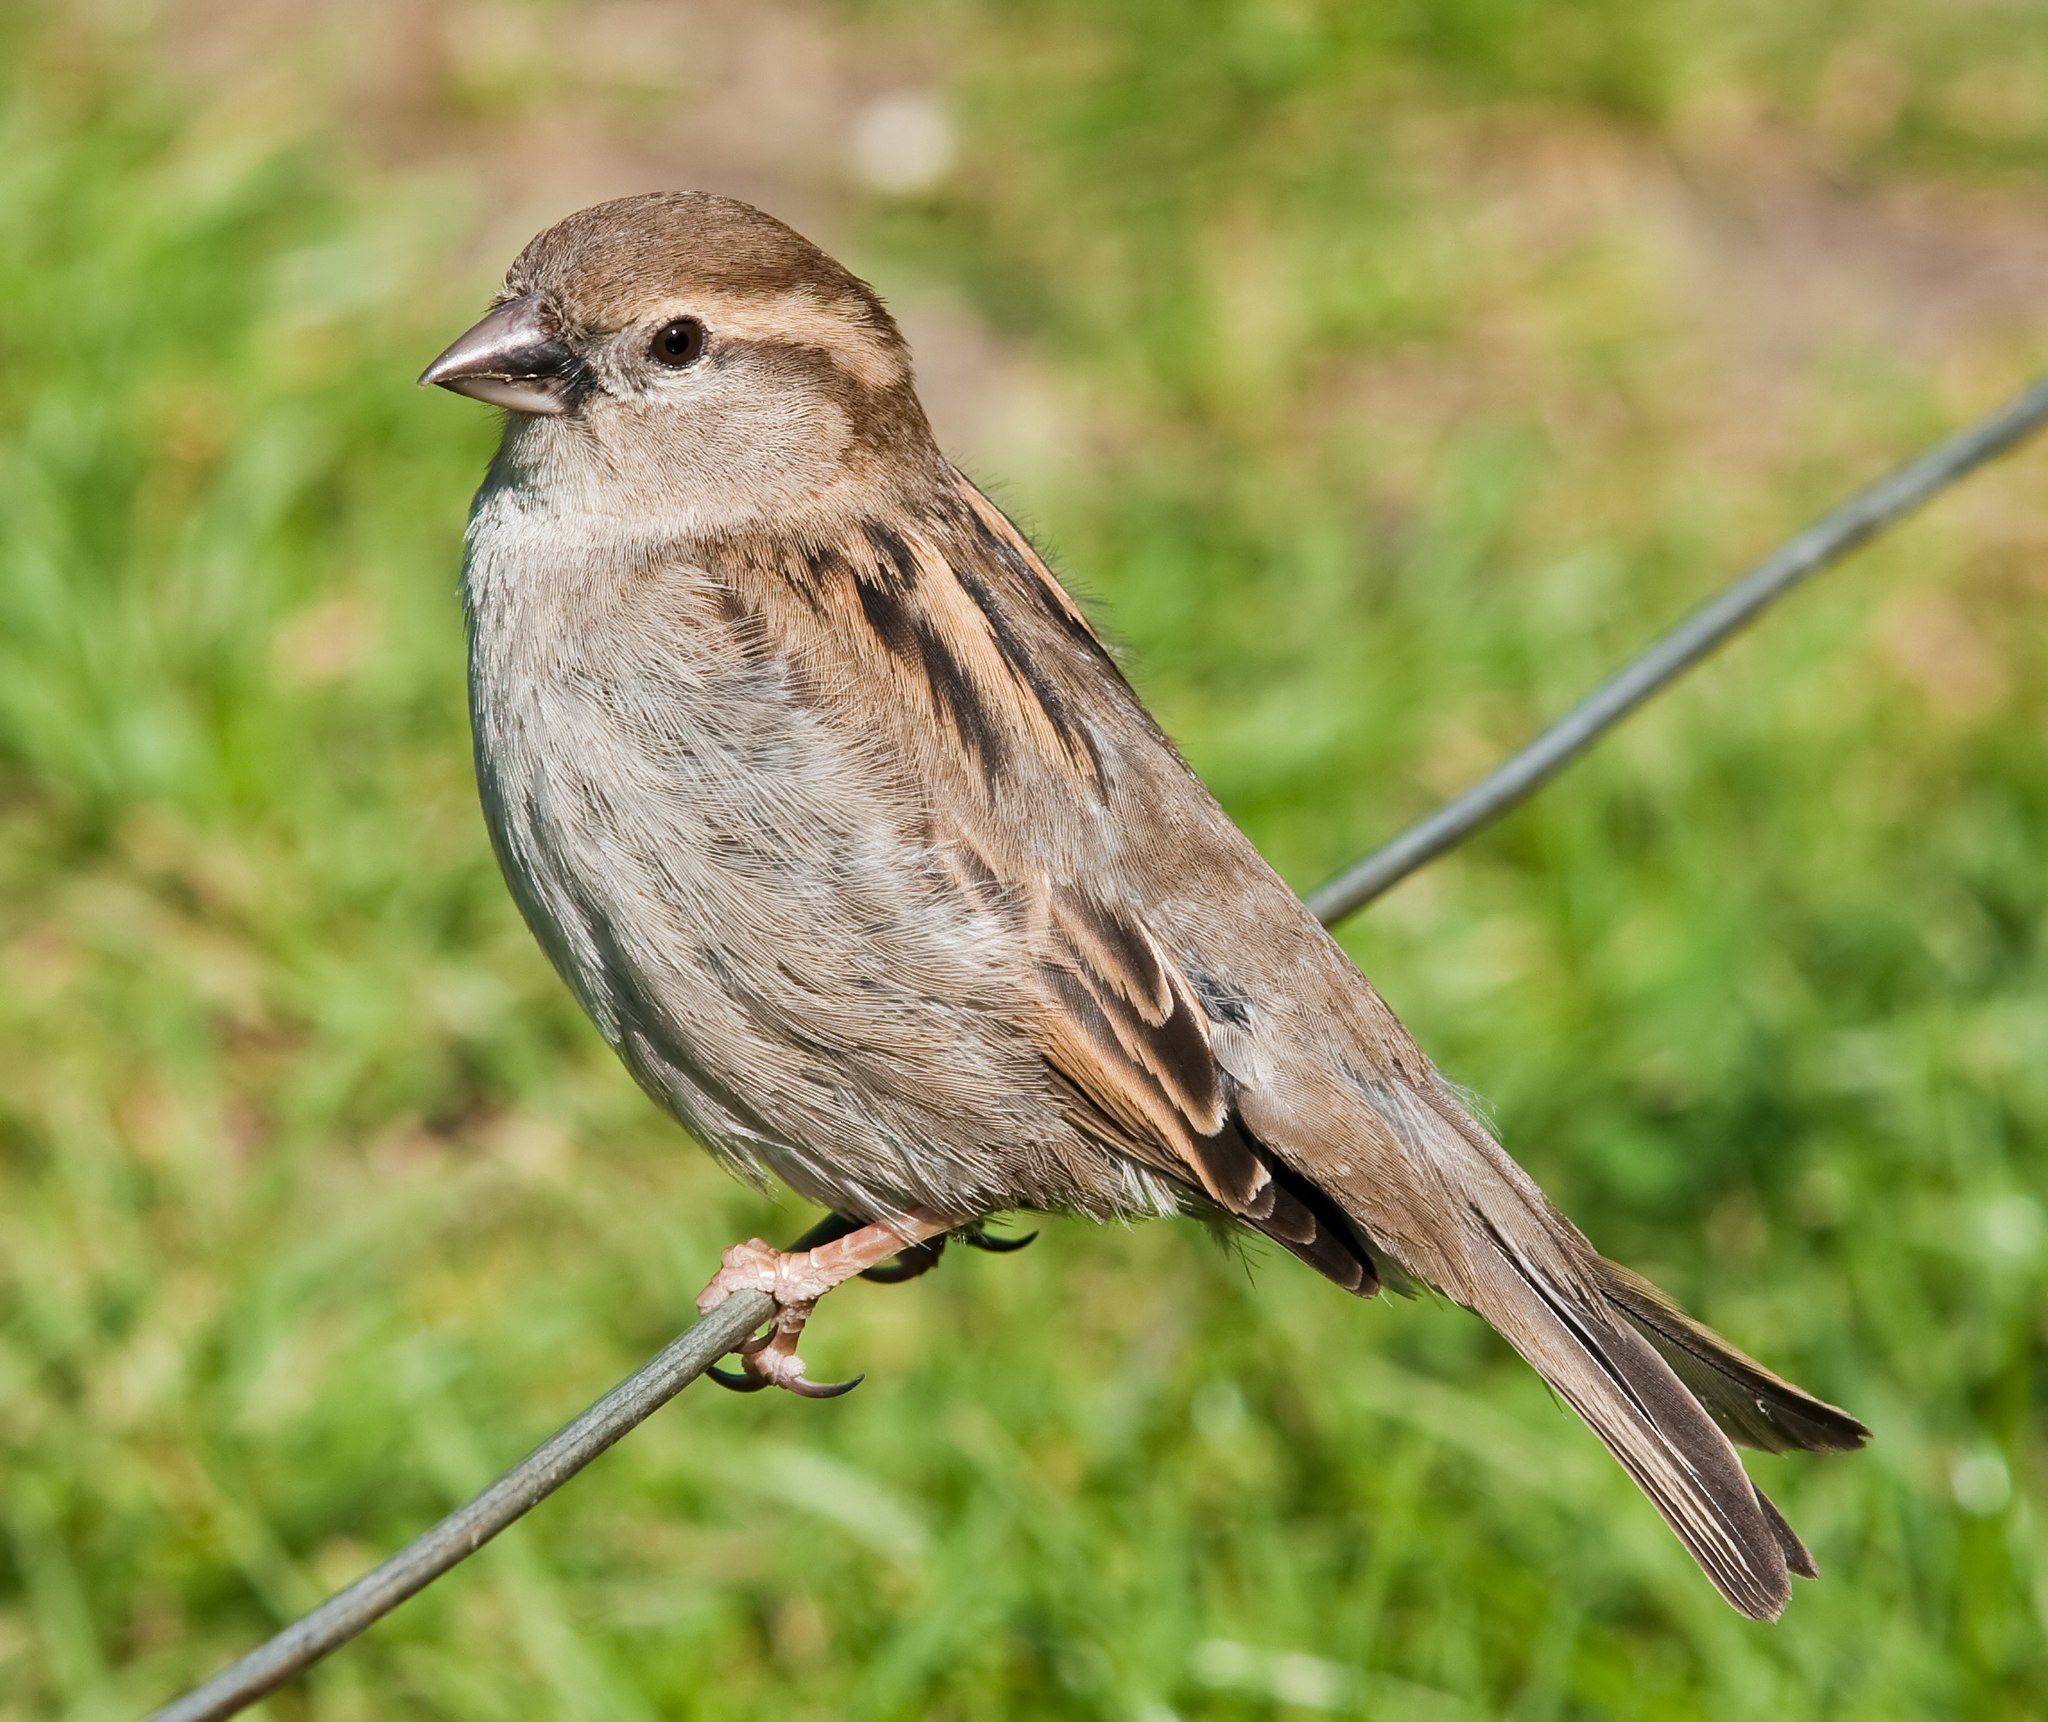 What kind of bird is a sparrow?